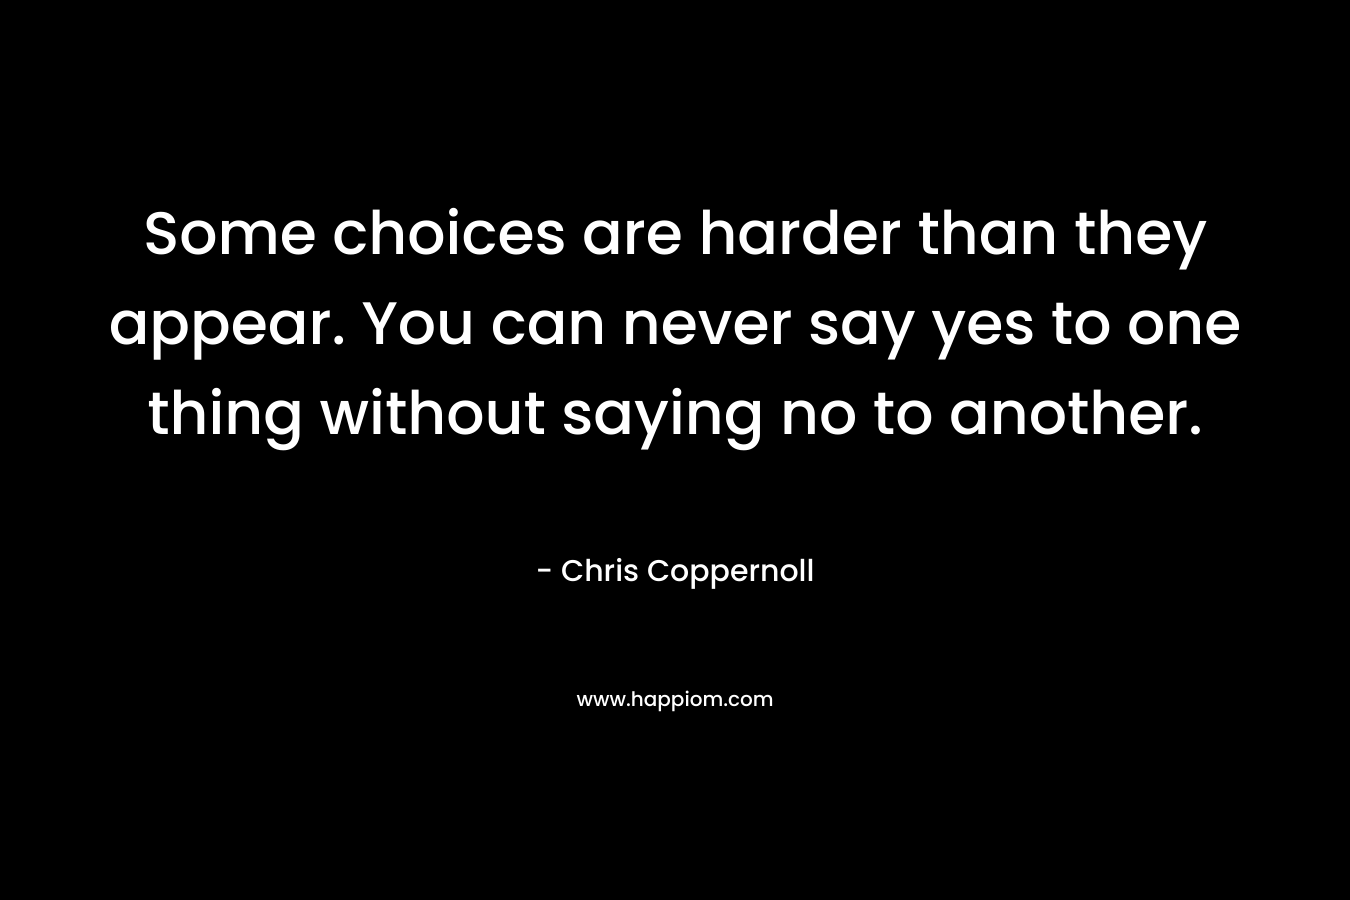 Some choices are harder than they appear. You can never say yes to one thing without saying no to another. – Chris Coppernoll